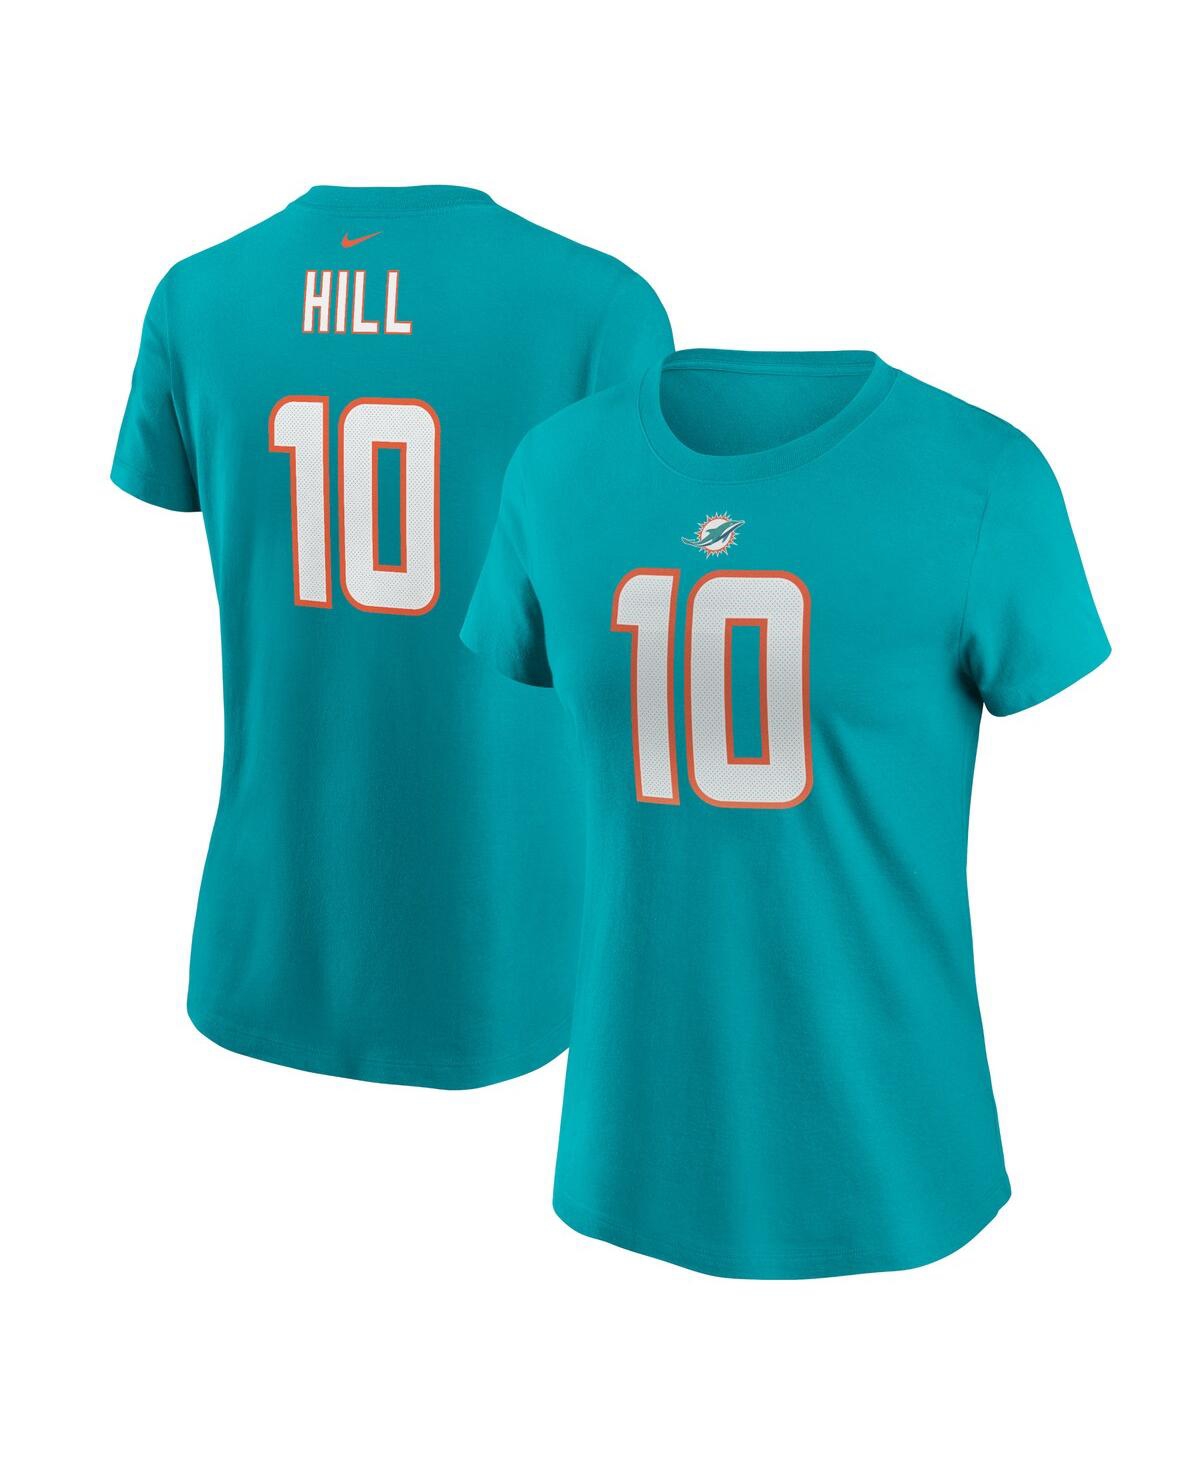 NIKE WOMEN'S NIKE TYREEK HILL AQUA MIAMI DOLPHINS PLAYER NAME AND NUMBER T-SHIRT